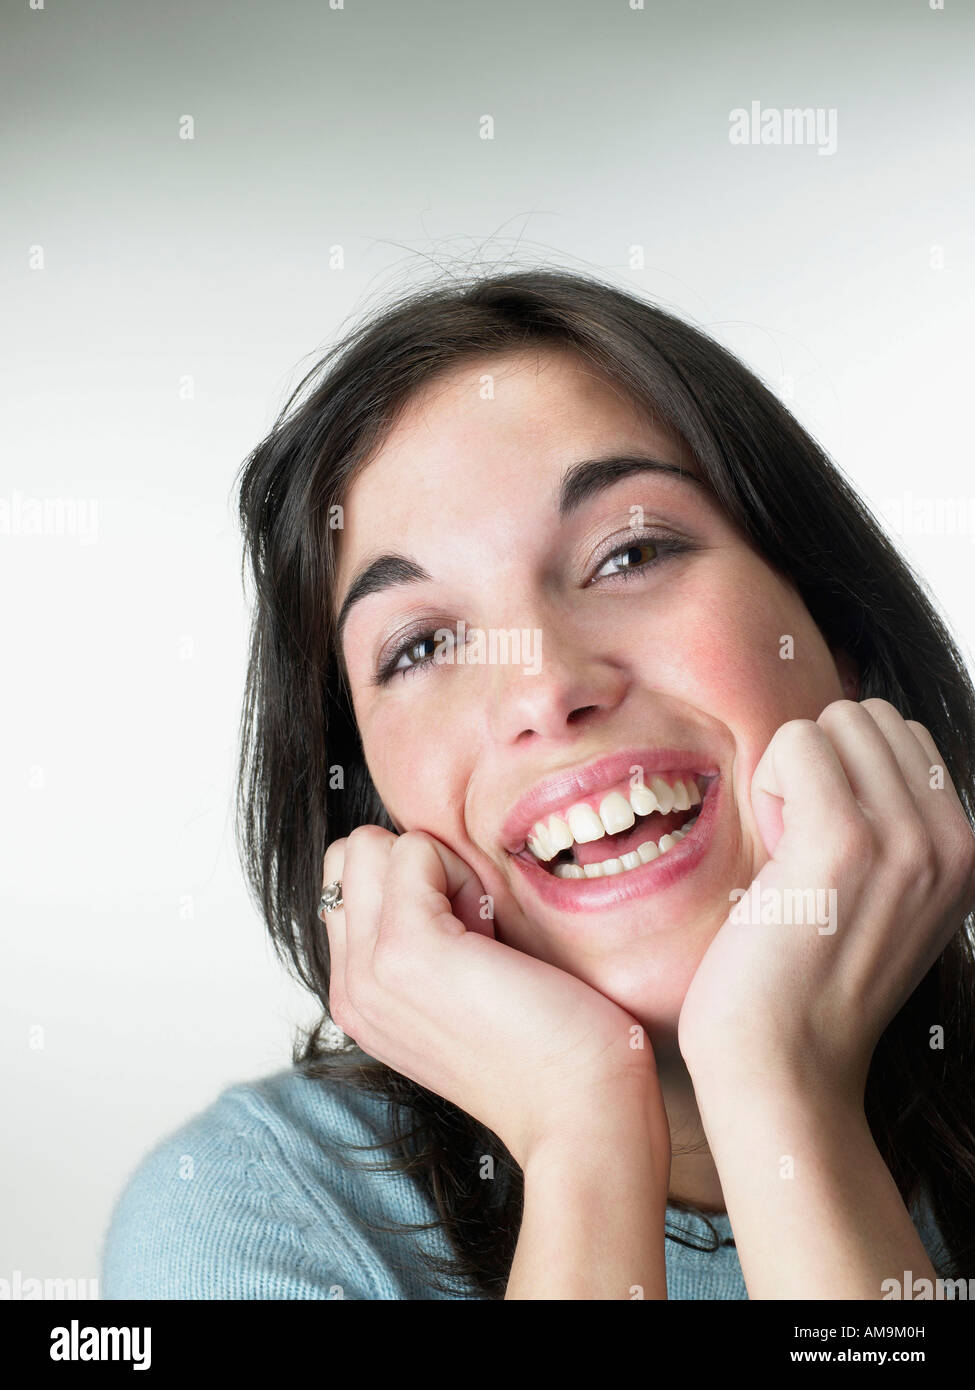 Woman smiling resting head on hands. Stock Photo